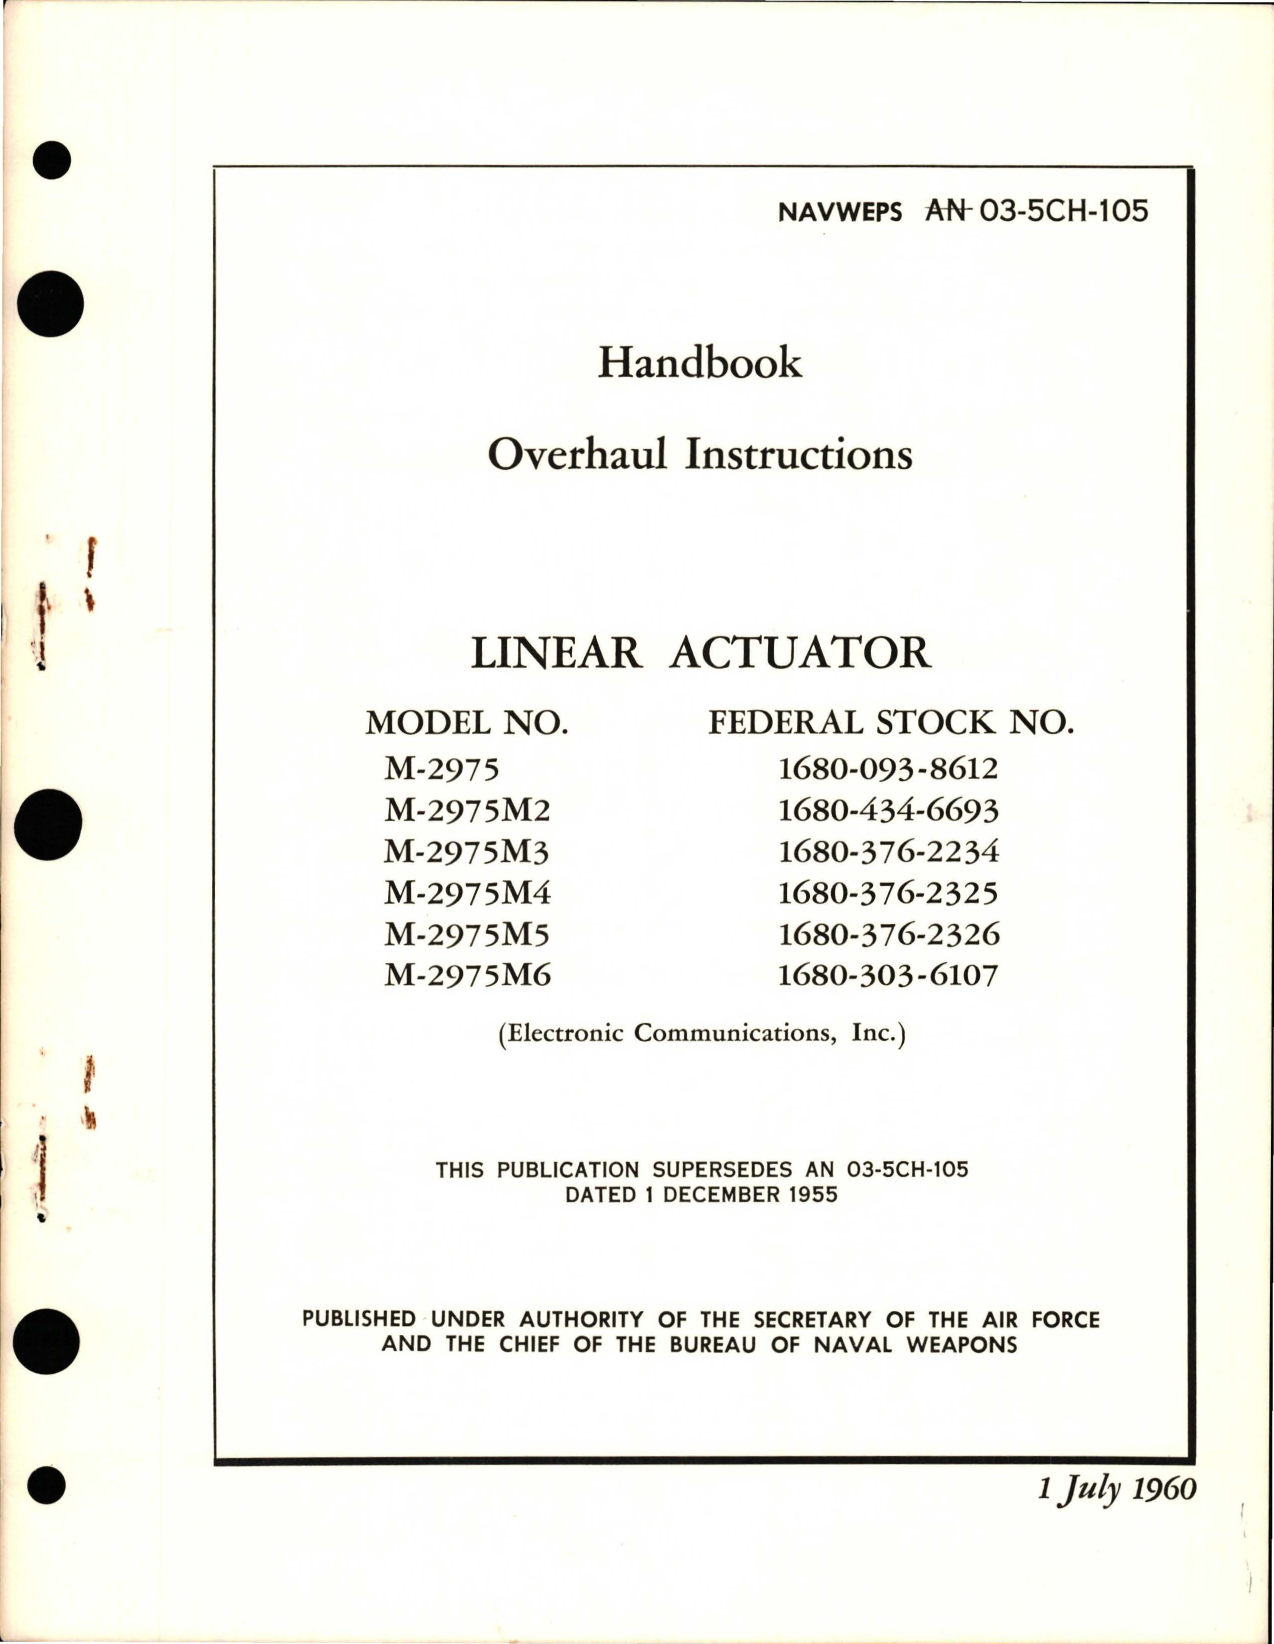 Sample page 1 from AirCorps Library document: Overhaul Instructions for Linear Actuator - Model M-2975, M-2975M2, M-2975M3, M-2975M4, M-2975M5, and M-2975M6